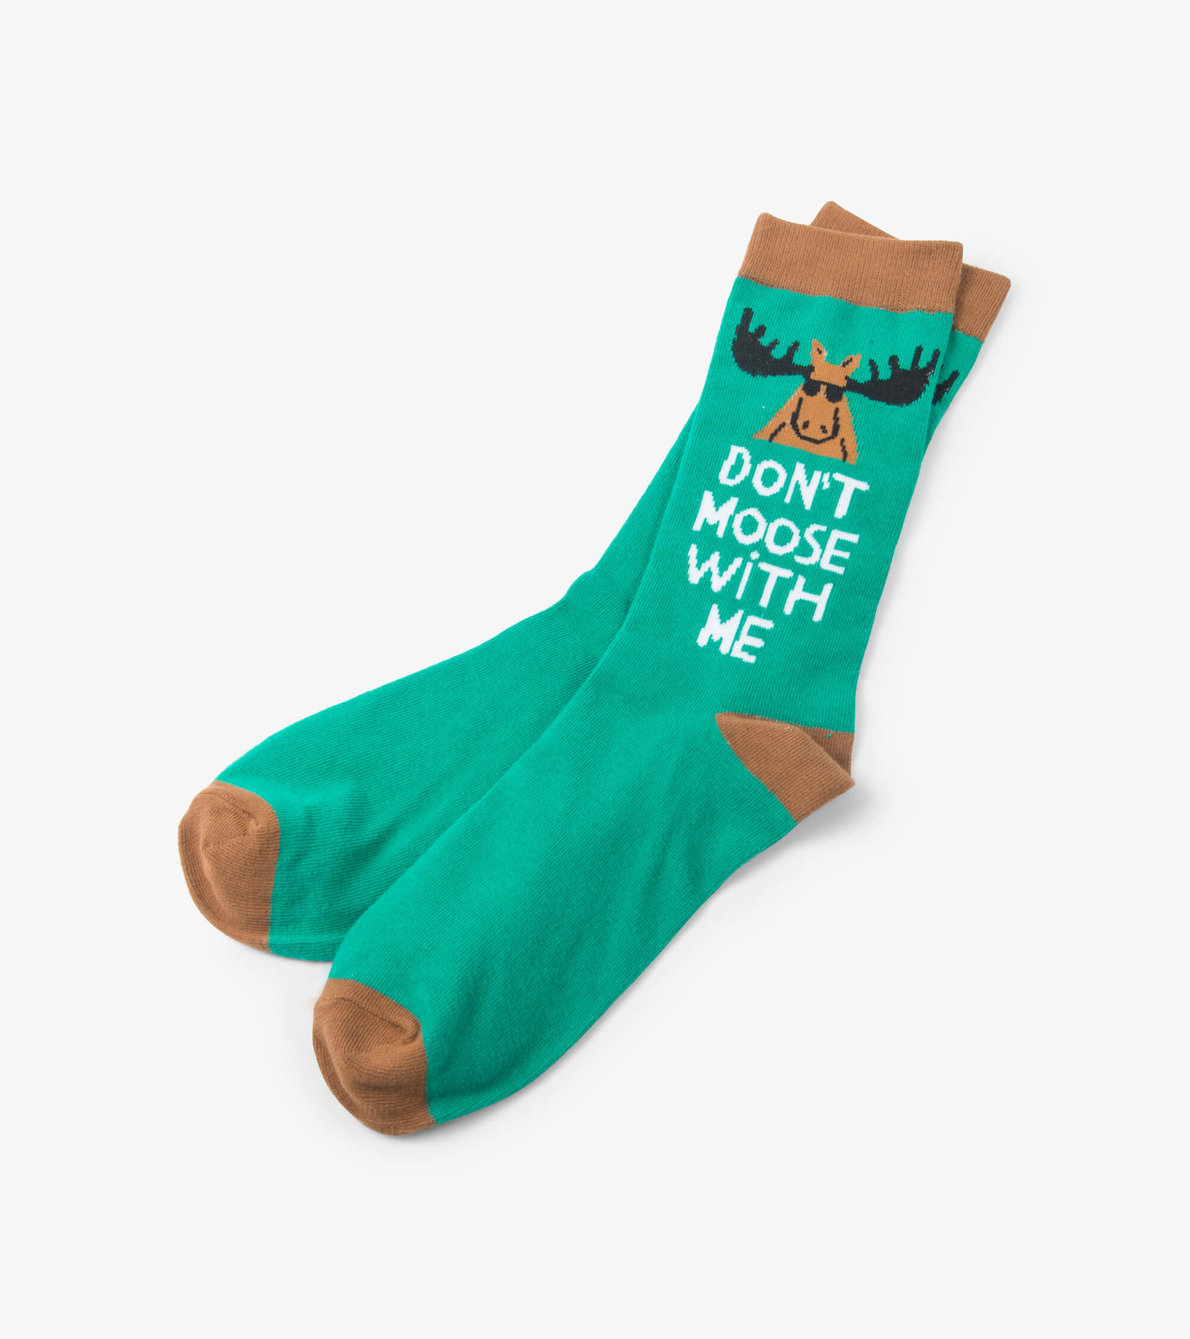 View larger image of Don't Moose with Me Men's Crew Socks